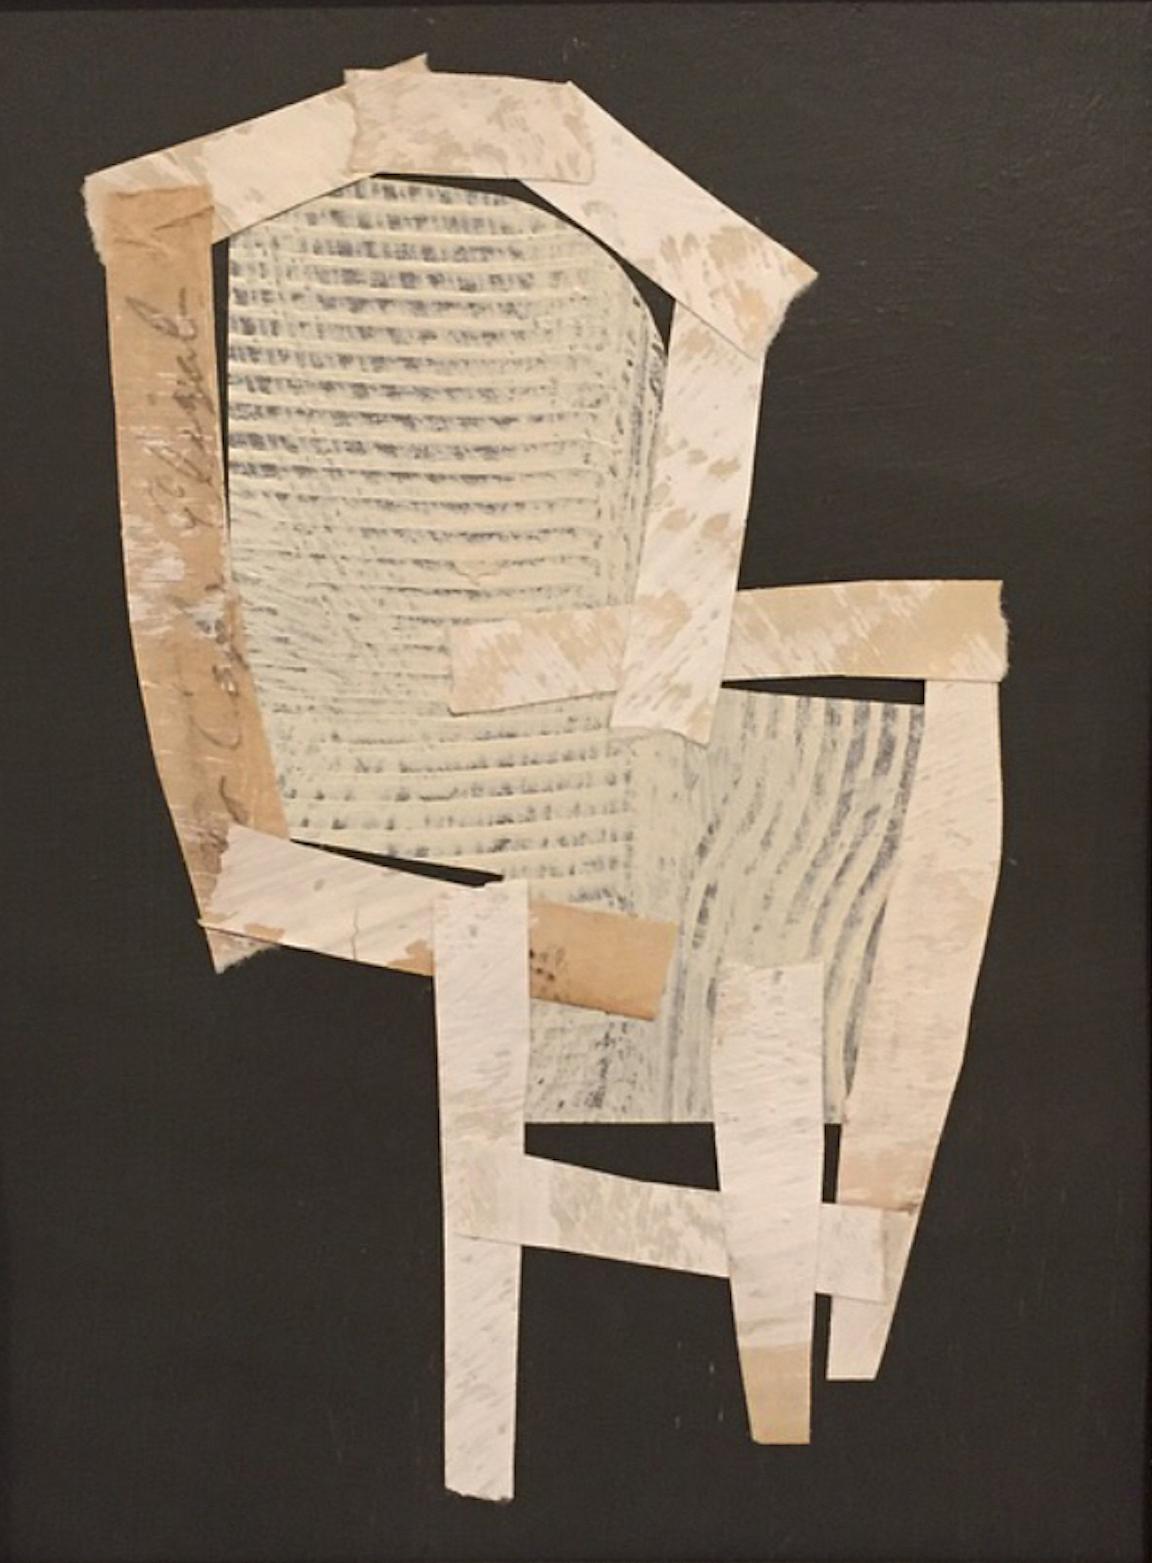 Armature Series Object IV, Abstract Painted Paper Collage, Ivory, Dark Charcoal